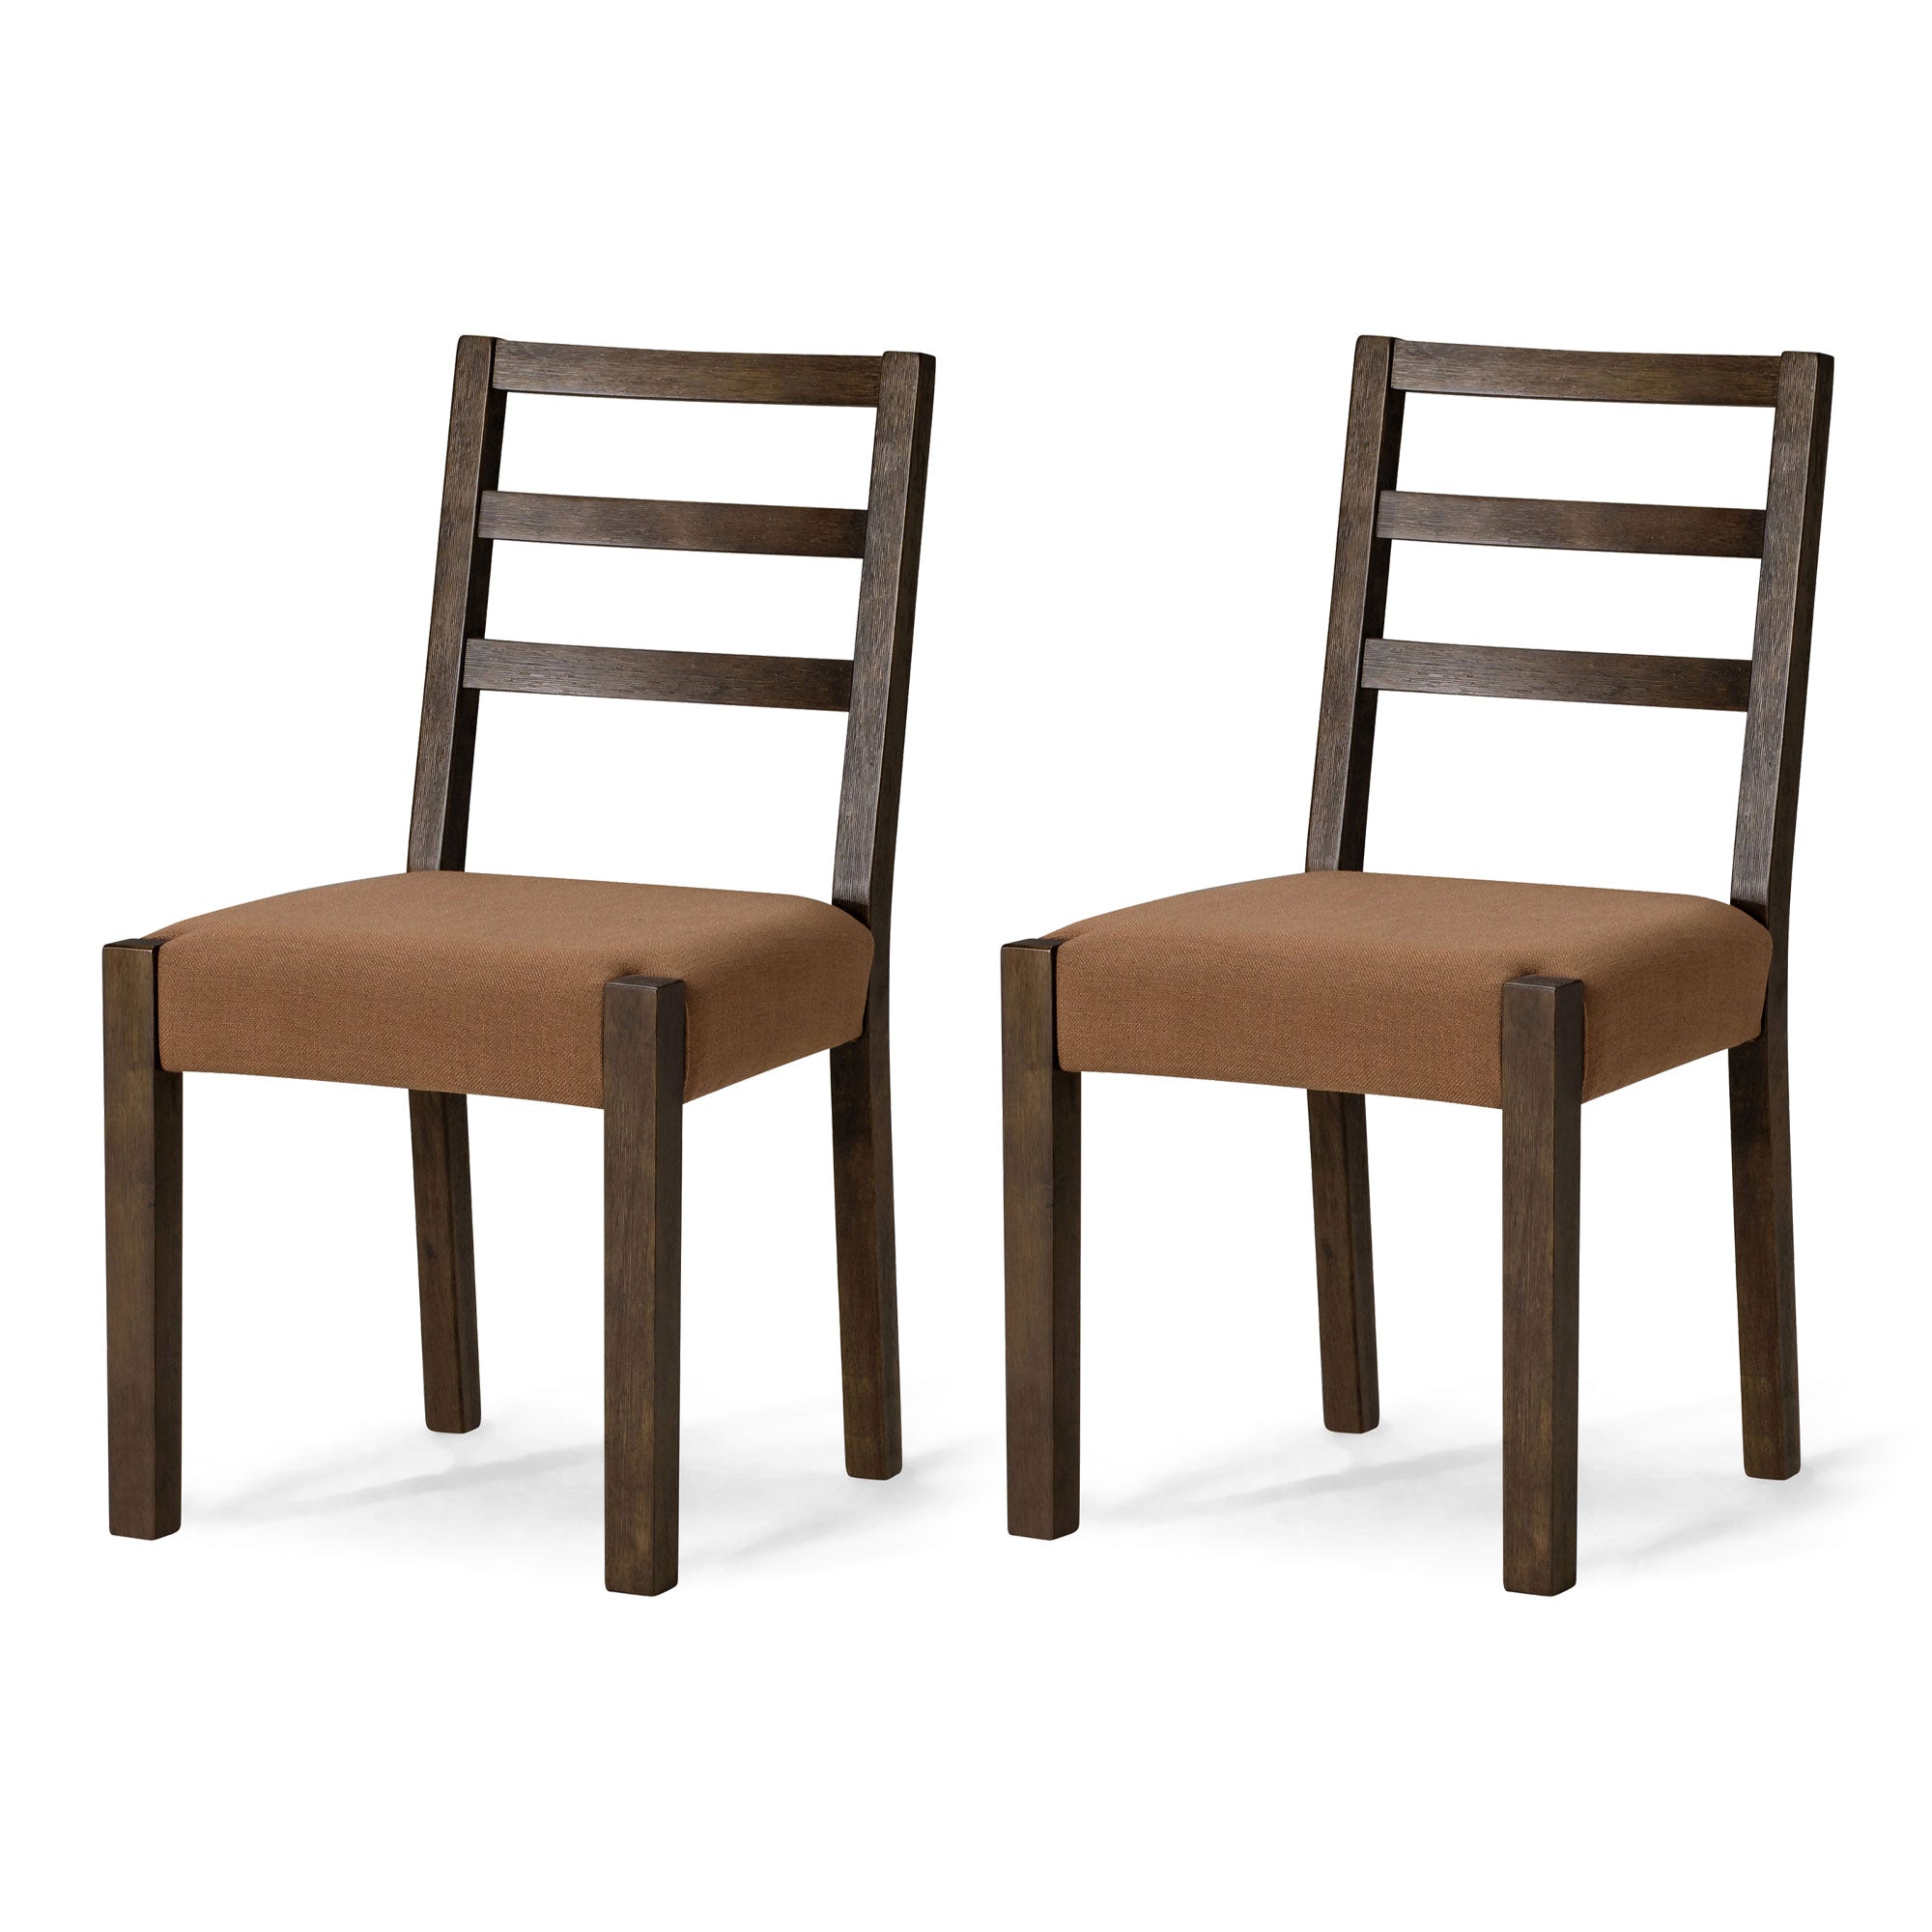 Willow Organic Wooden Dining Chair in Weathered Brown Finish with Clay Canvas Fabric Upholstery, Set of 2 in Dining Furniture by Maven Lane